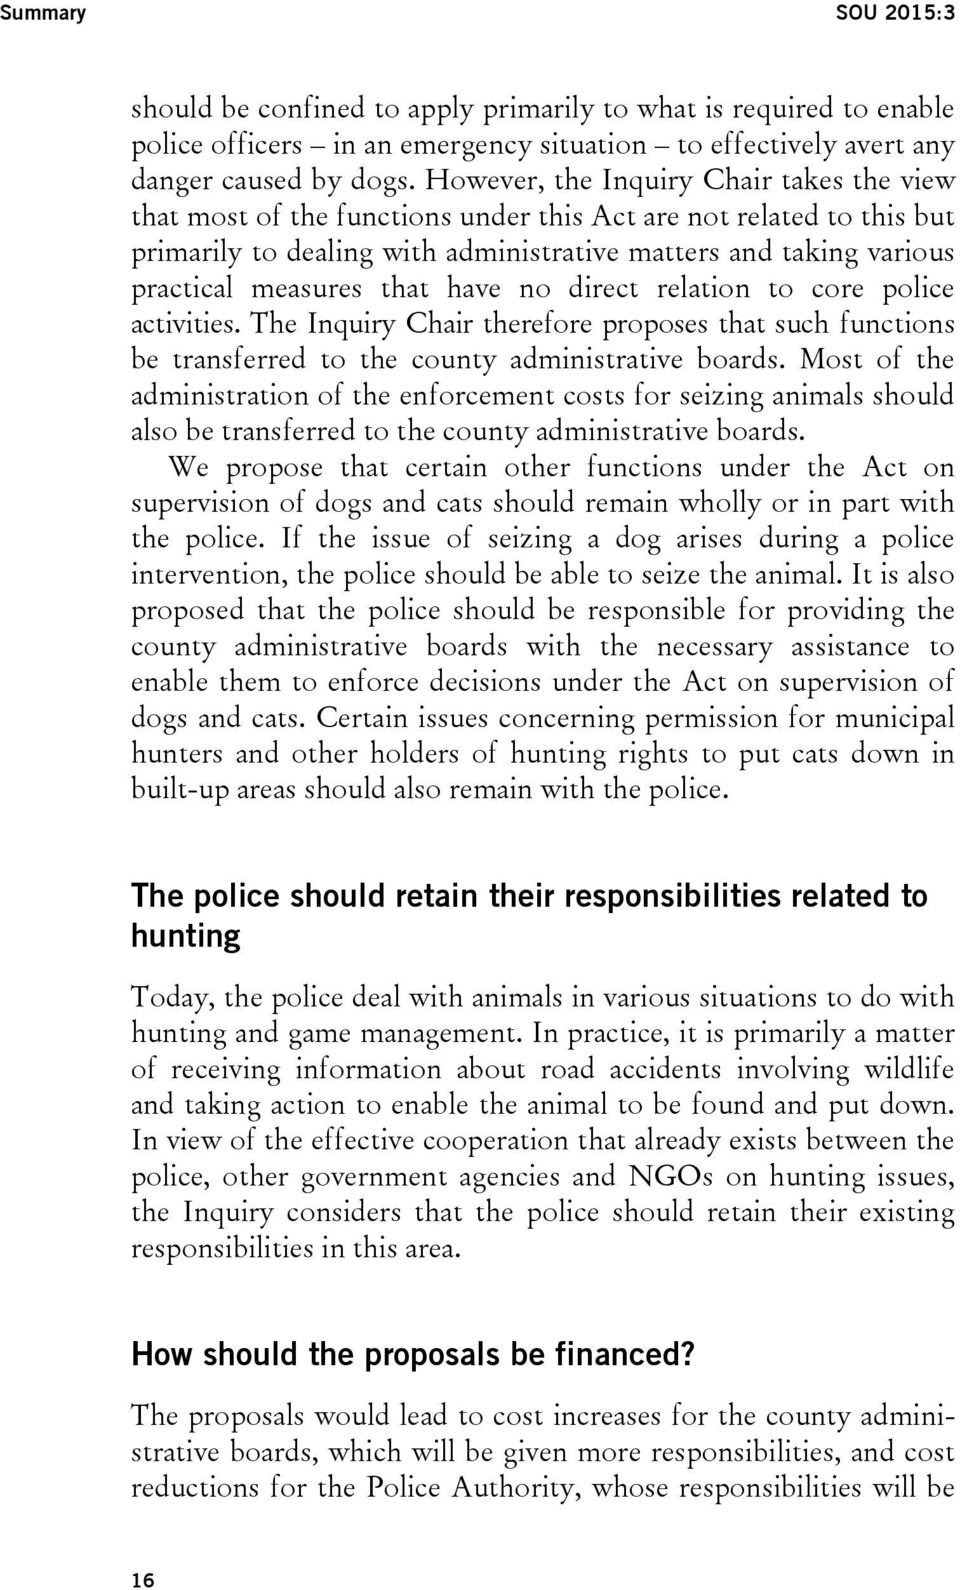 that have no direct relation to core police activities. The Inquiry Chair therefore proposes that such functions be transferred to the county administrative boards.